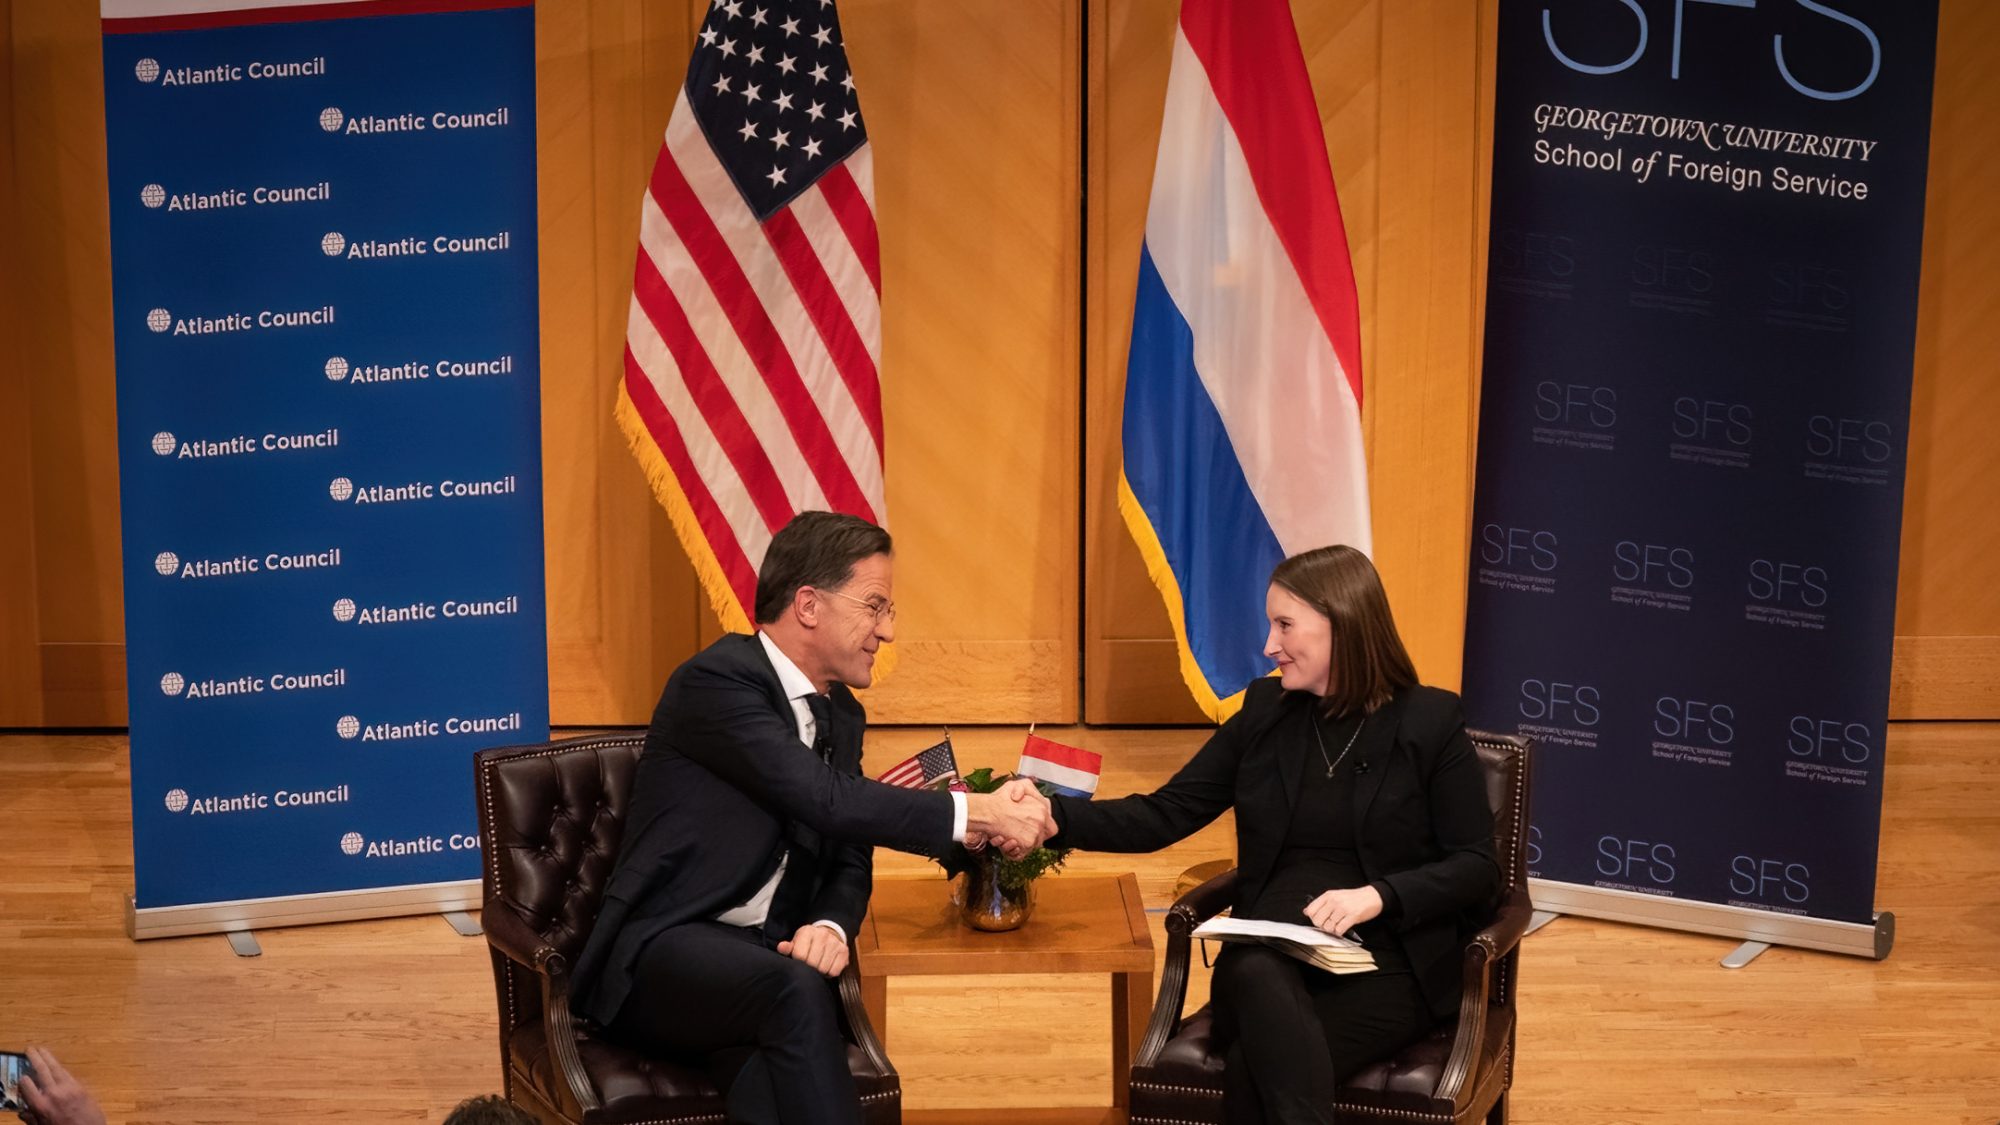 Mark Rutte and Amy Mackinnon shake hands while on-stage, with the American and Dutch flags in the background.